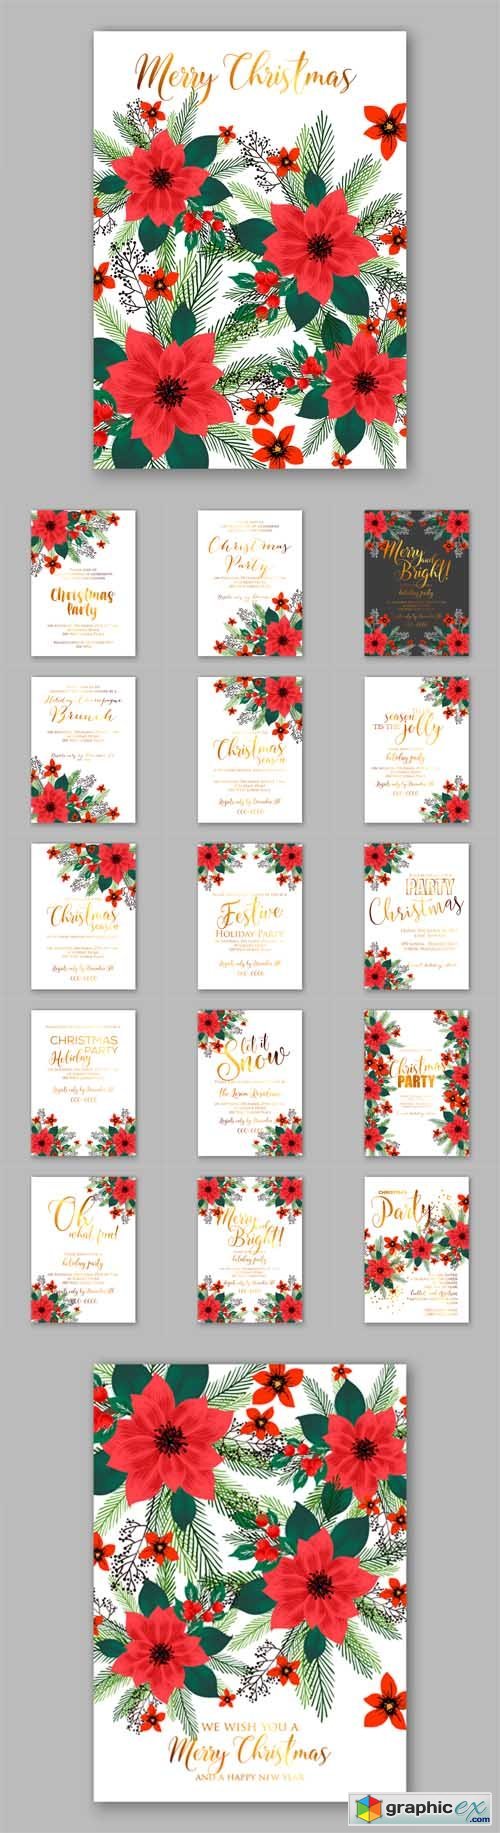 Merry Christmas Party Invitations with Winter Wreath